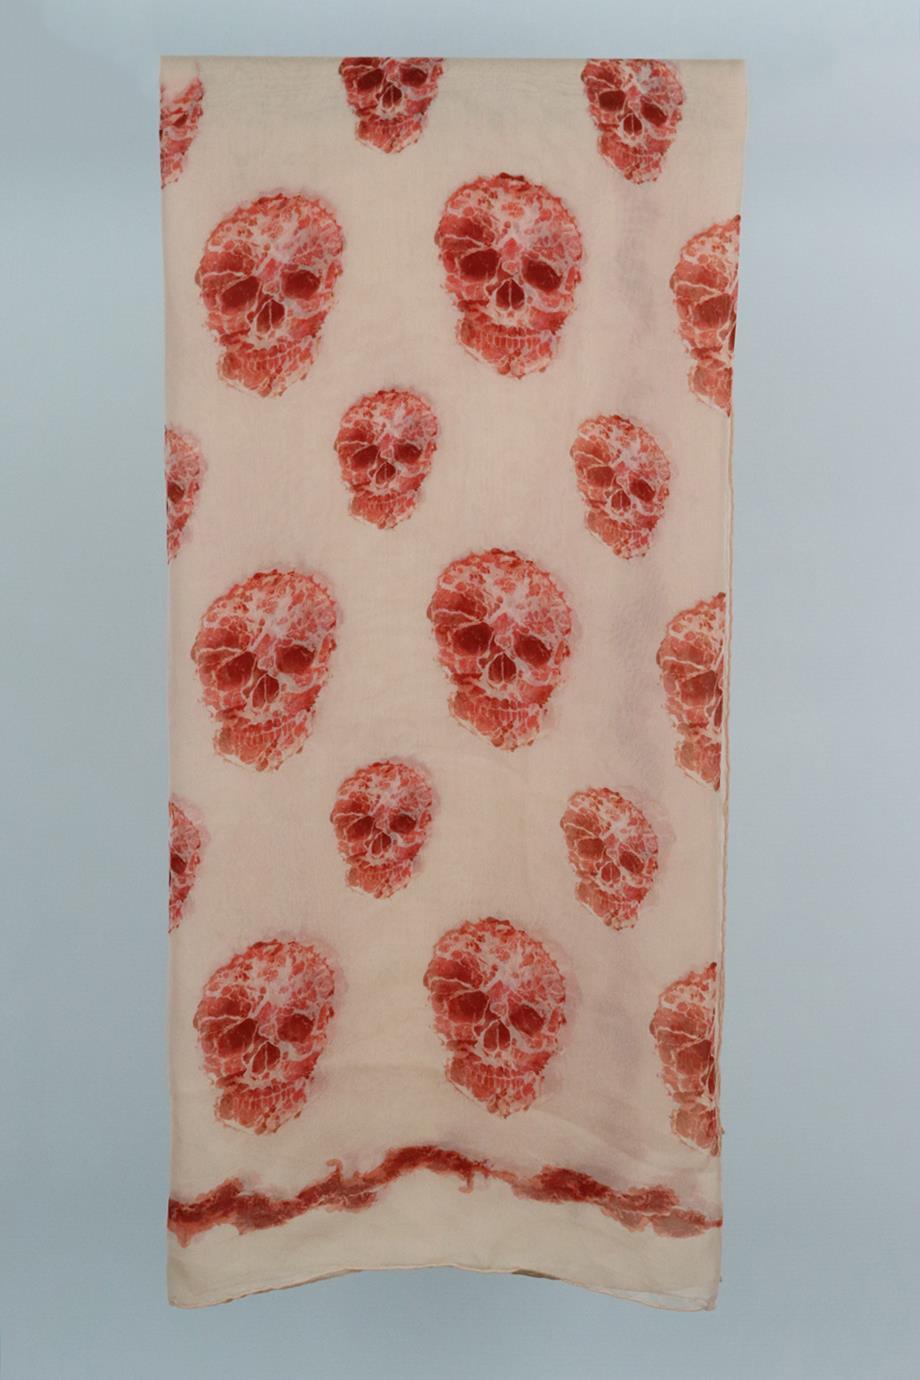 Alexander McQueen printed silk chiffon scarf. Tonal-pink. 100% Silk. Does not come with dustbag or box. Length: 50 in. Width: 50 in. Very good condition - Light signs of wear; see pictures.